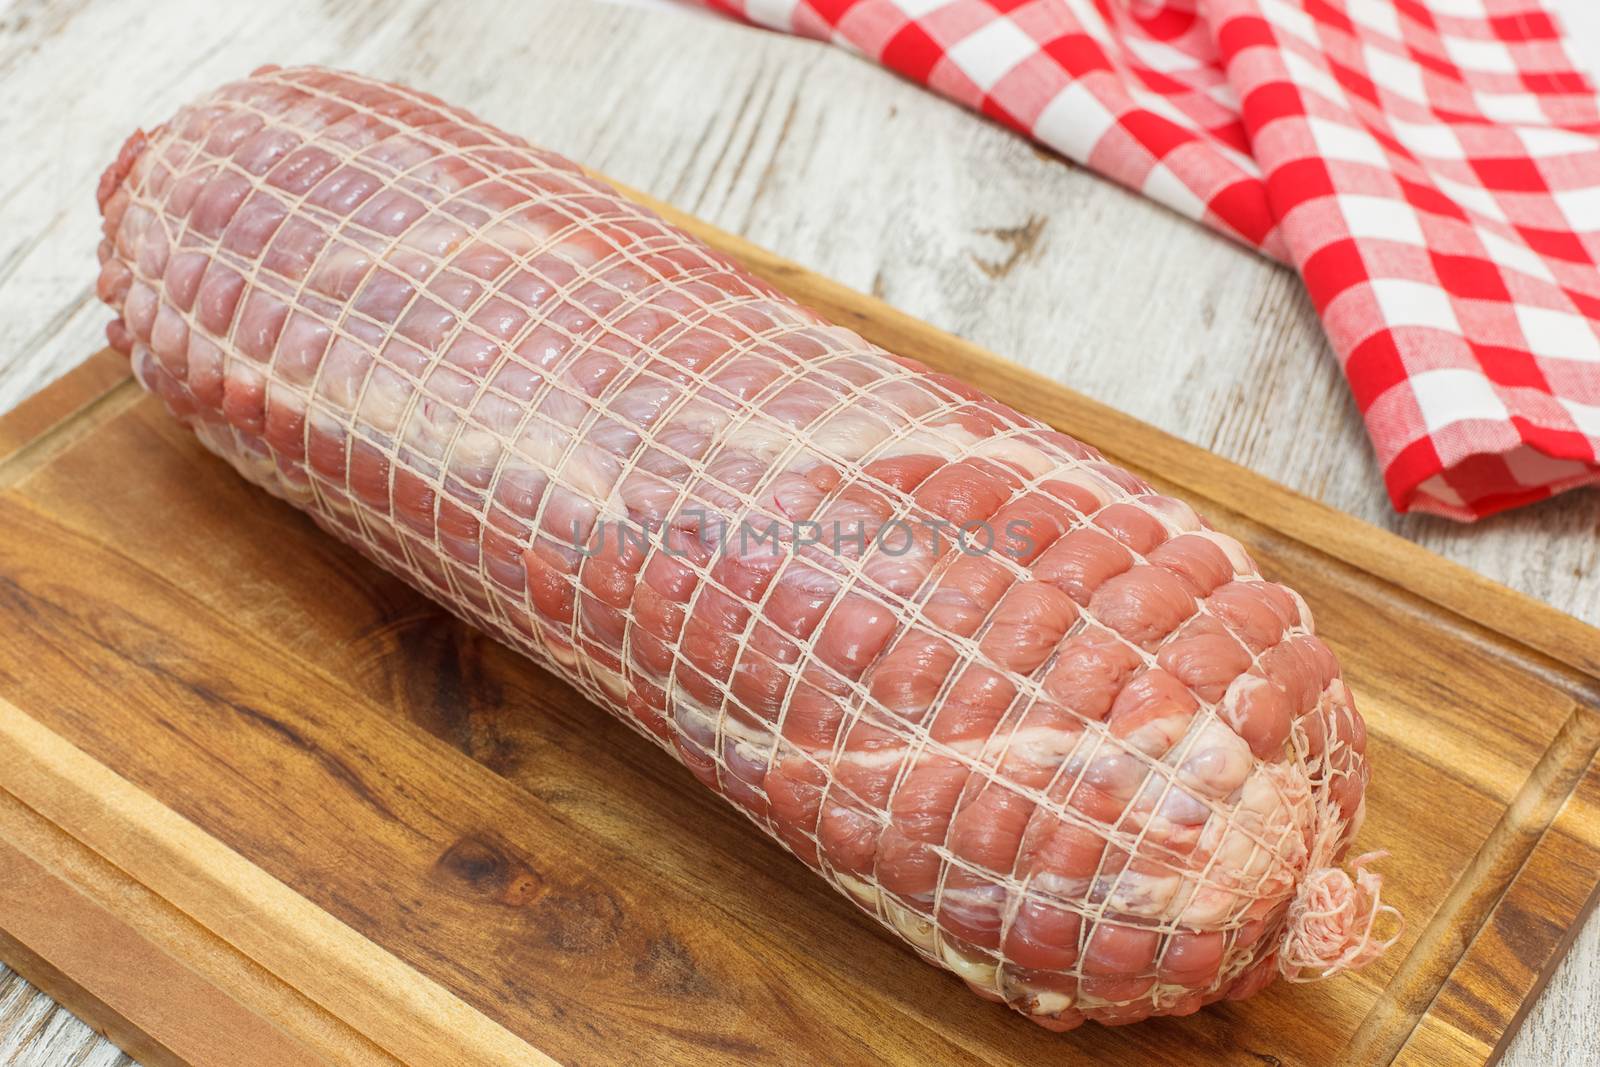 Raw rolled meat enclosed in tied netting. Raw rolled meat enclosed in tied netting. Roast of veal stuffed with bacon, ham and spices, ready to barbecue